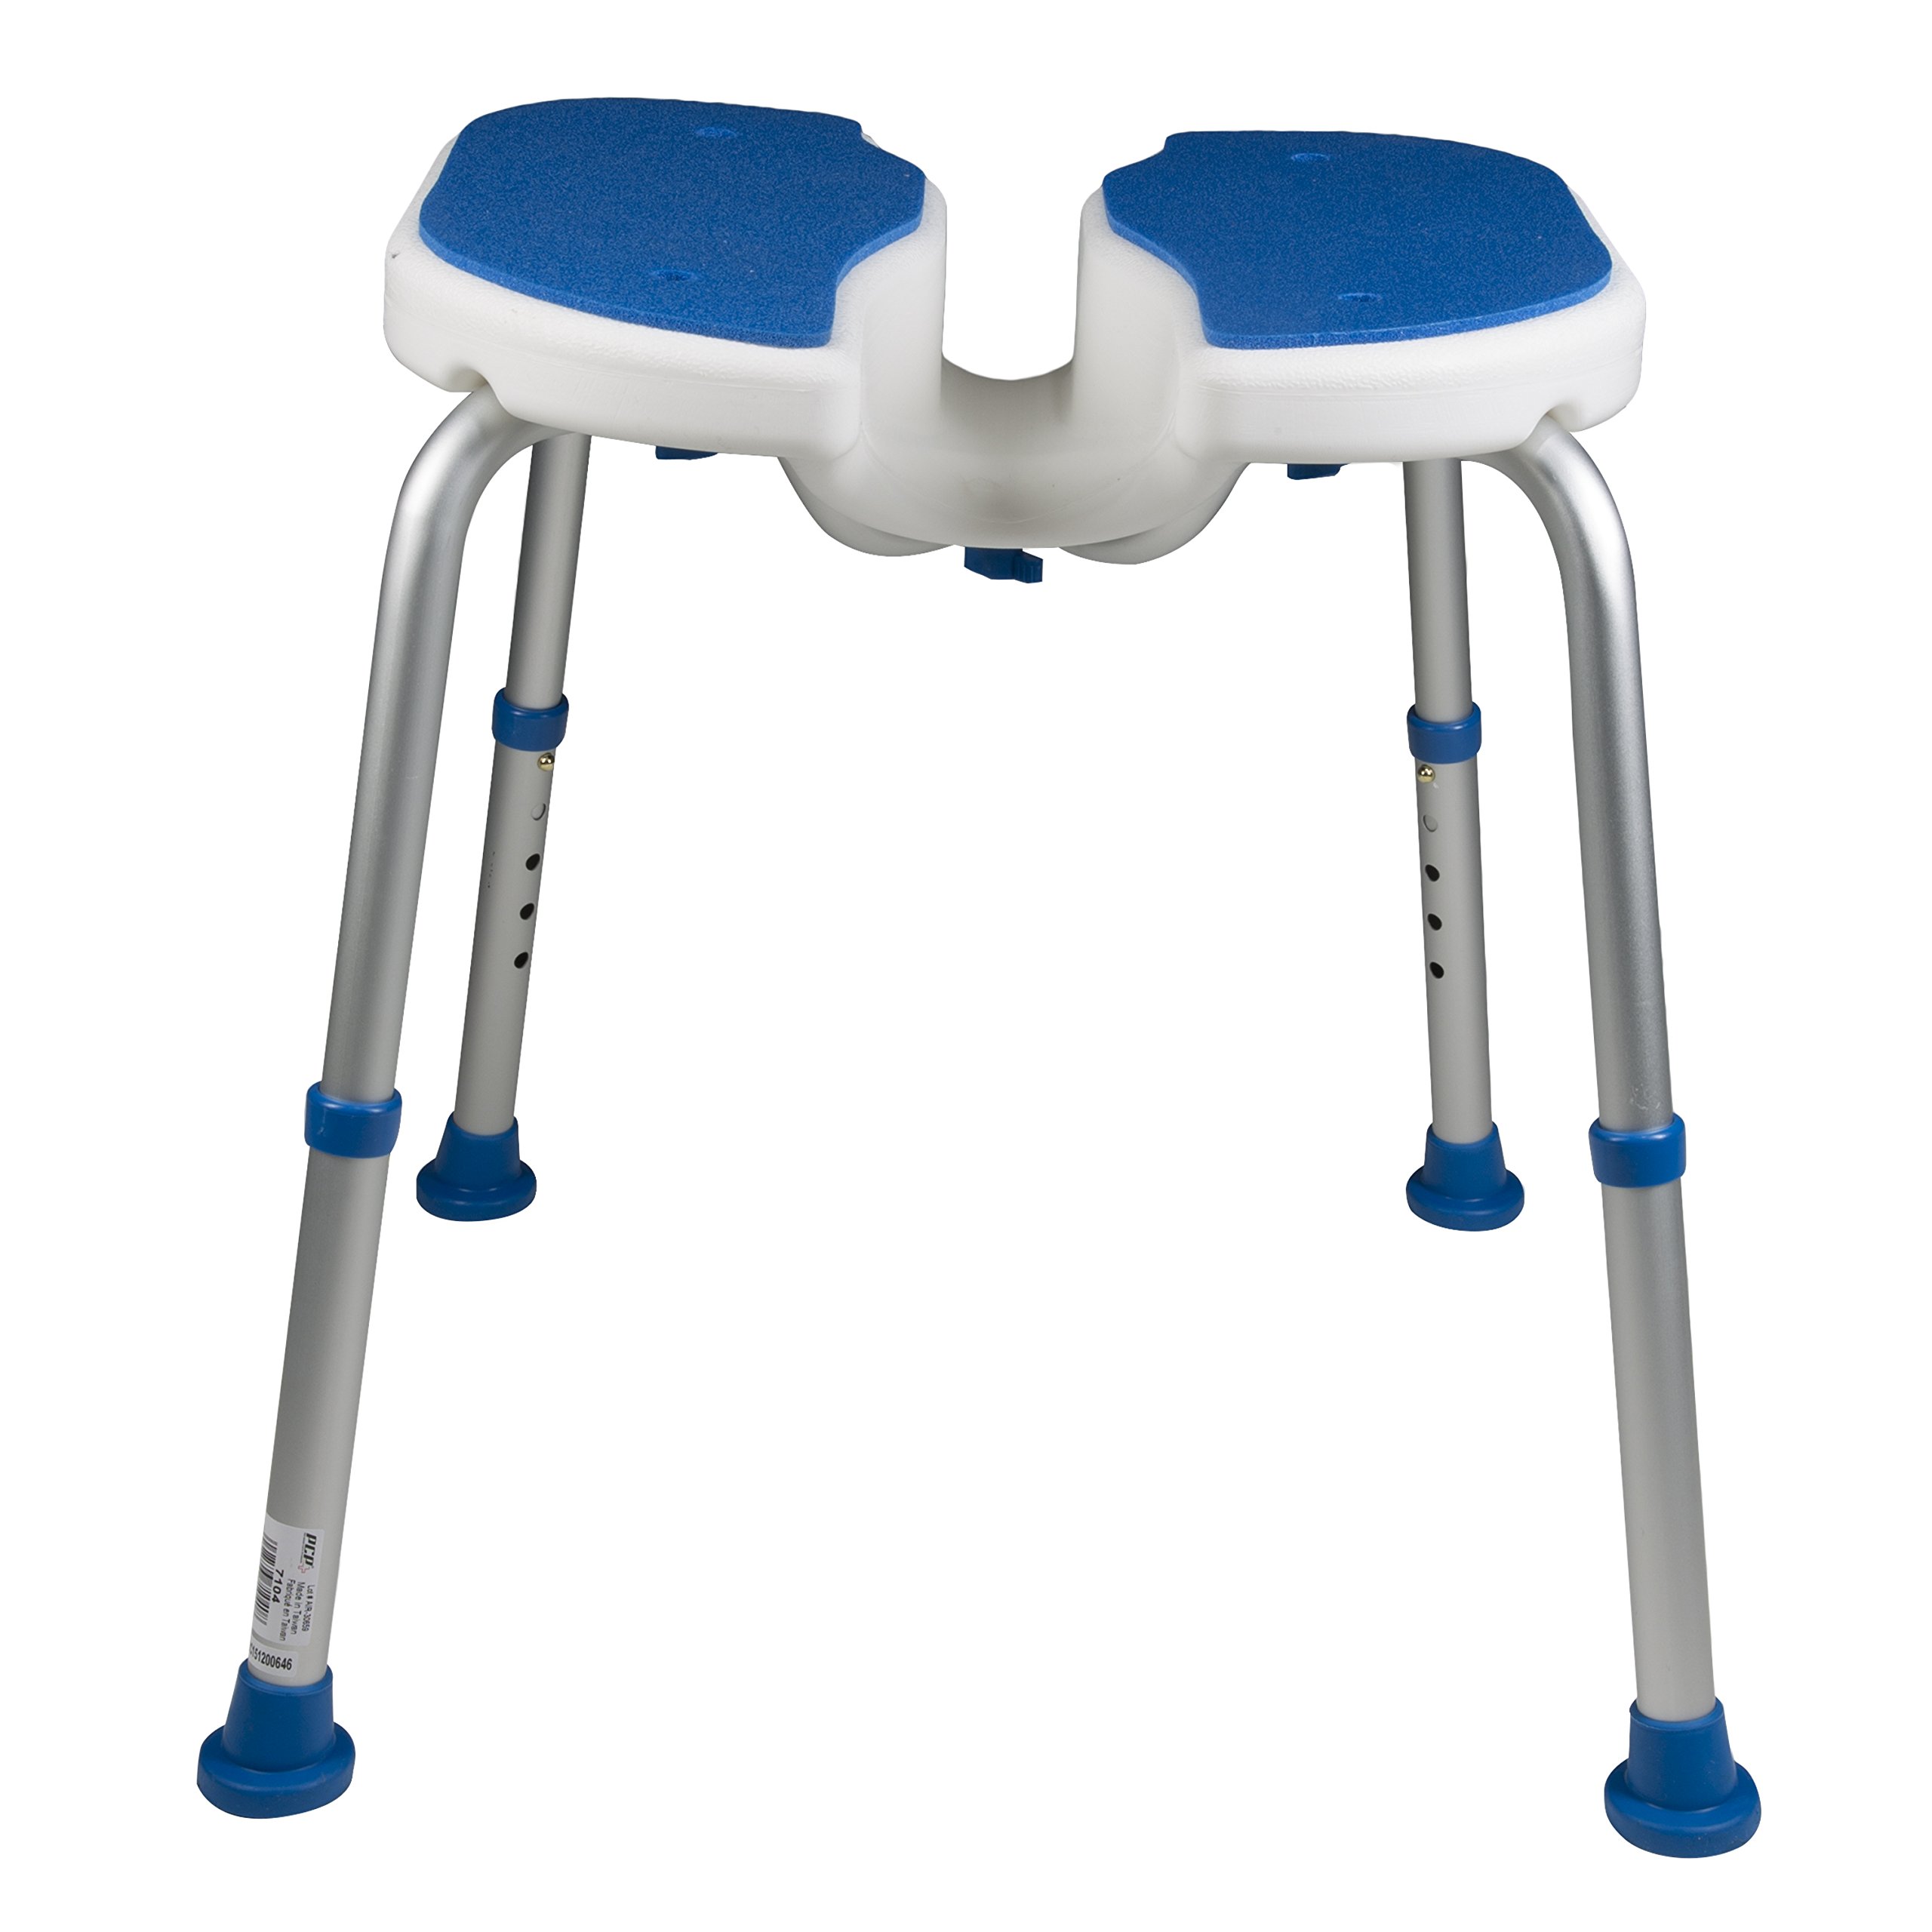 PCP Padded Bath Safety Seat with Hygienic Cutout, White/Blue